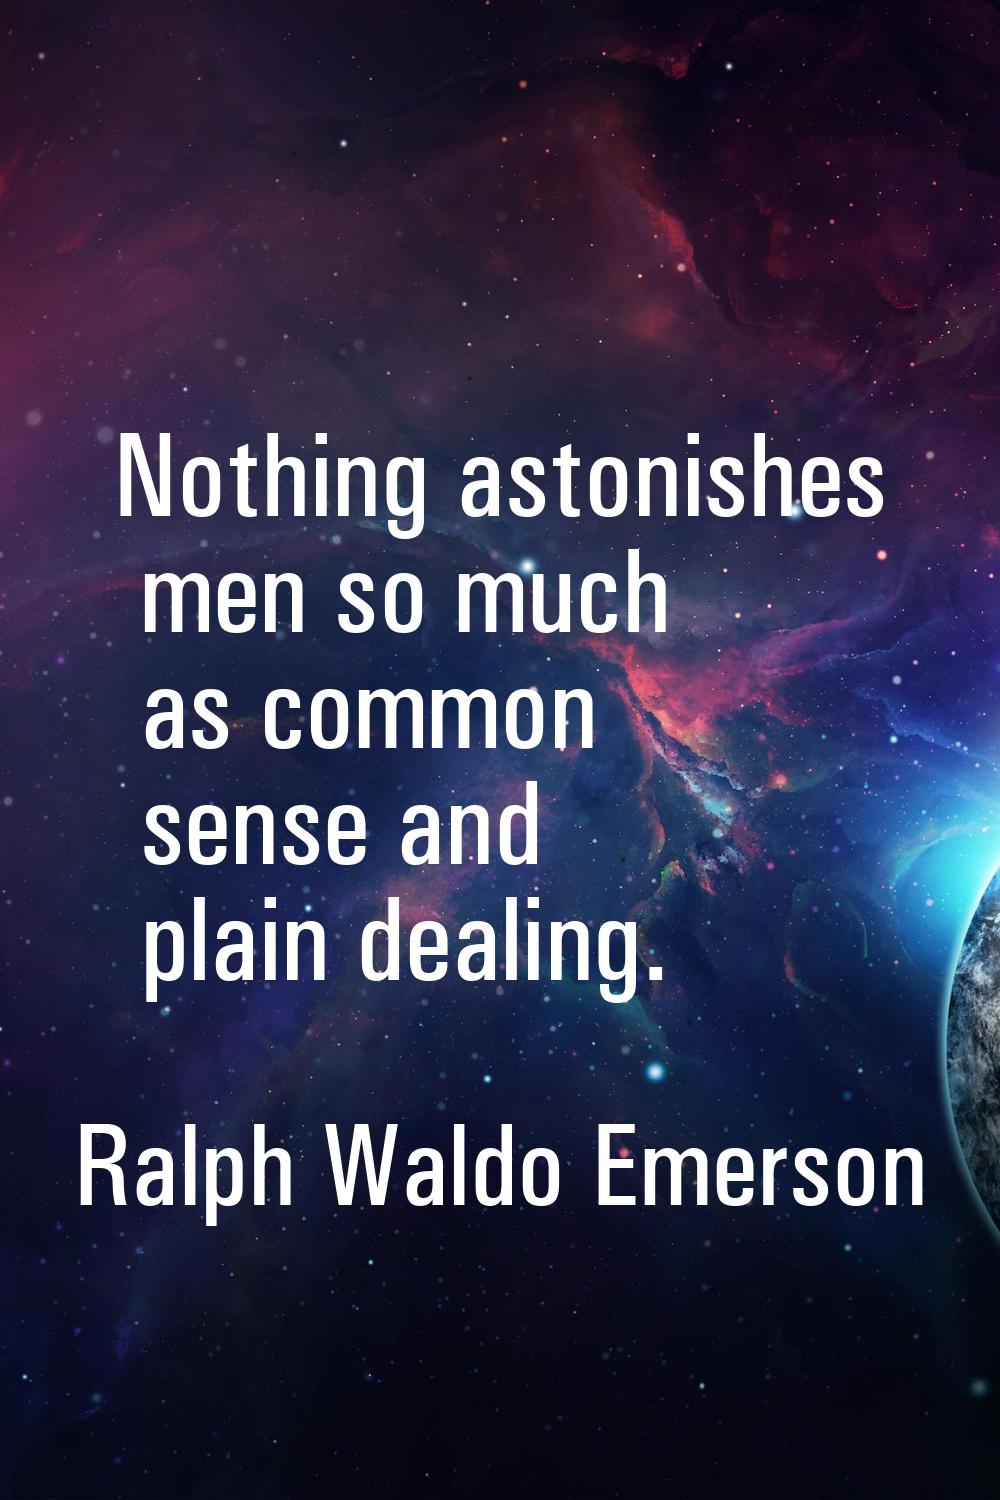 Nothing astonishes men so much as common sense and plain dealing.